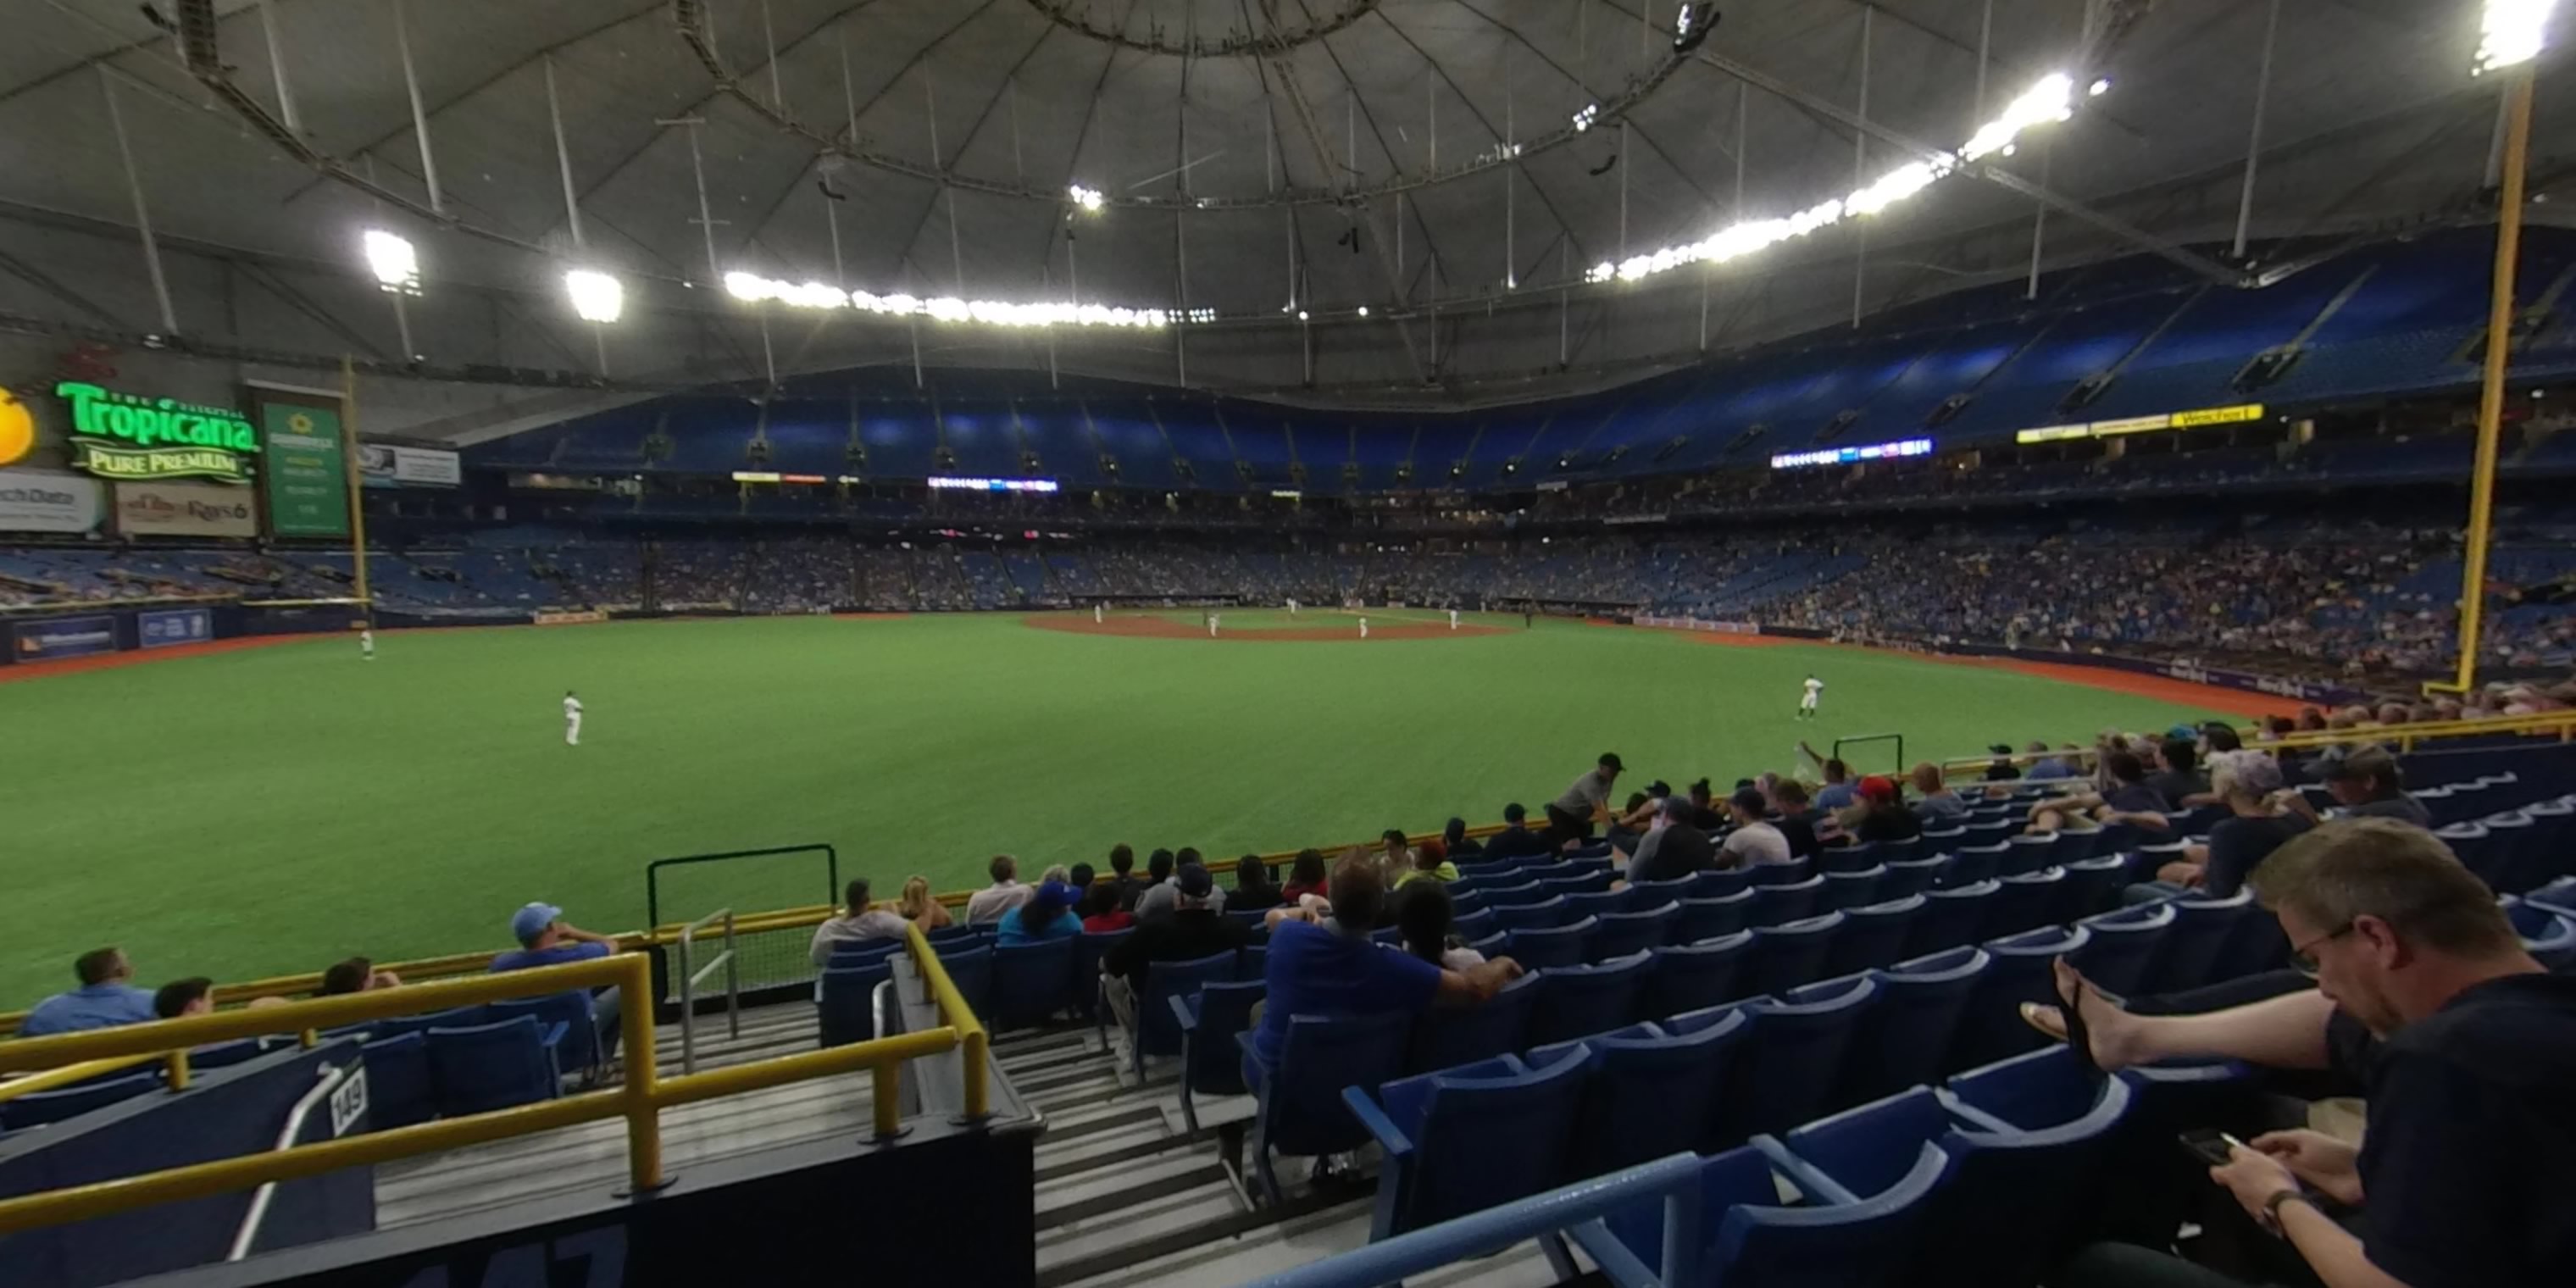 section 149 panoramic seat view  for baseball - tropicana field